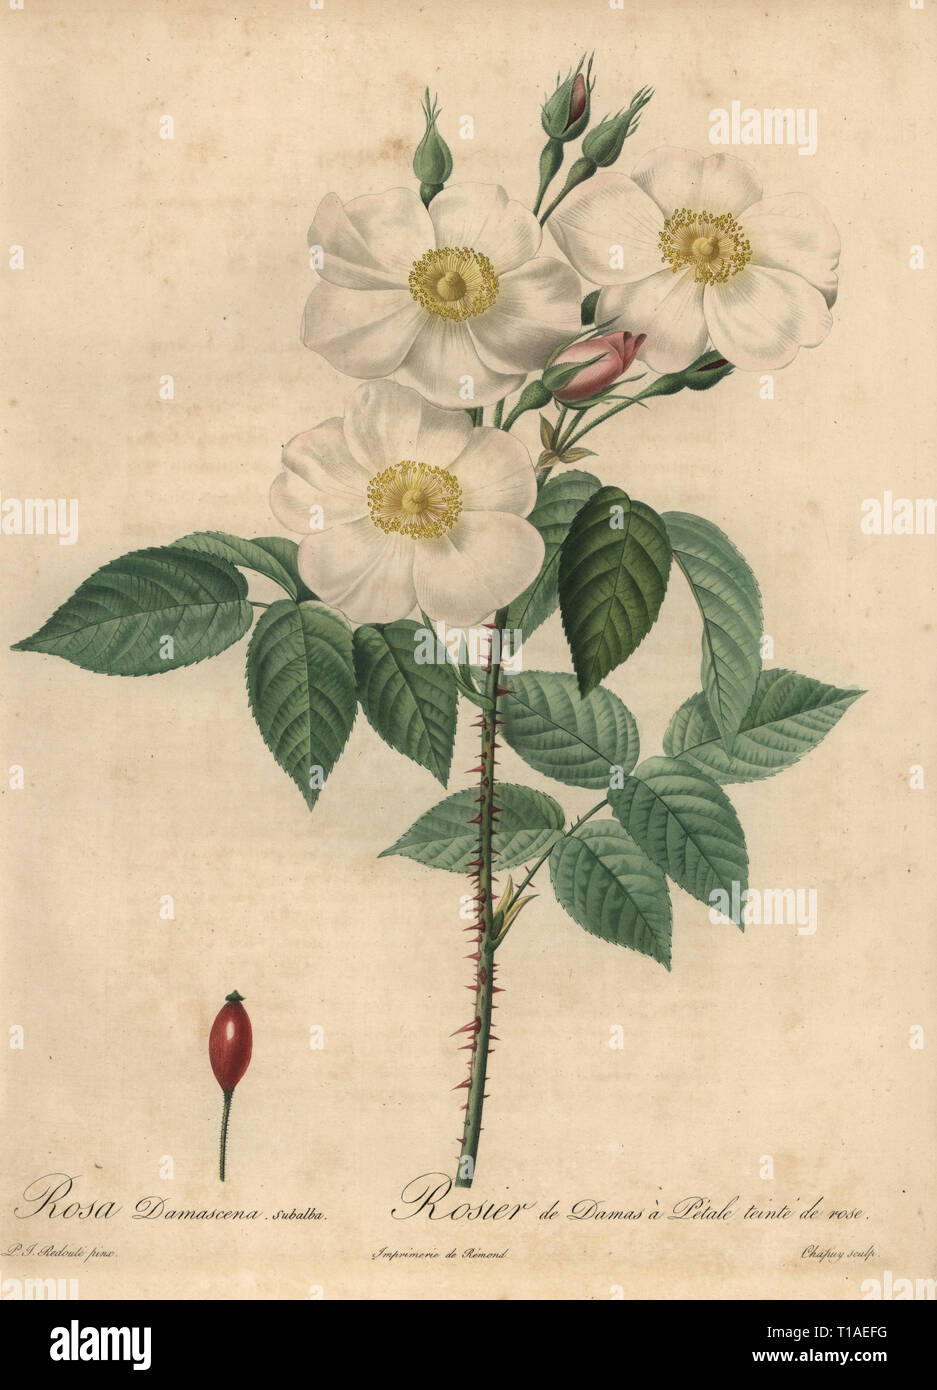 White Damask rose, Rosa x damascena. Rosa damascena subalba, Rosier de Damas a Petale teinte de rose. Stipple copperplate engraving by Jean Baptiste Chapuy handcoloured a la poupee after a botanical illustration by Pierre-Joseph Redoute from the first folio edition of Les Roses, Firmin Didot, Paris, 1817. Stock Photo